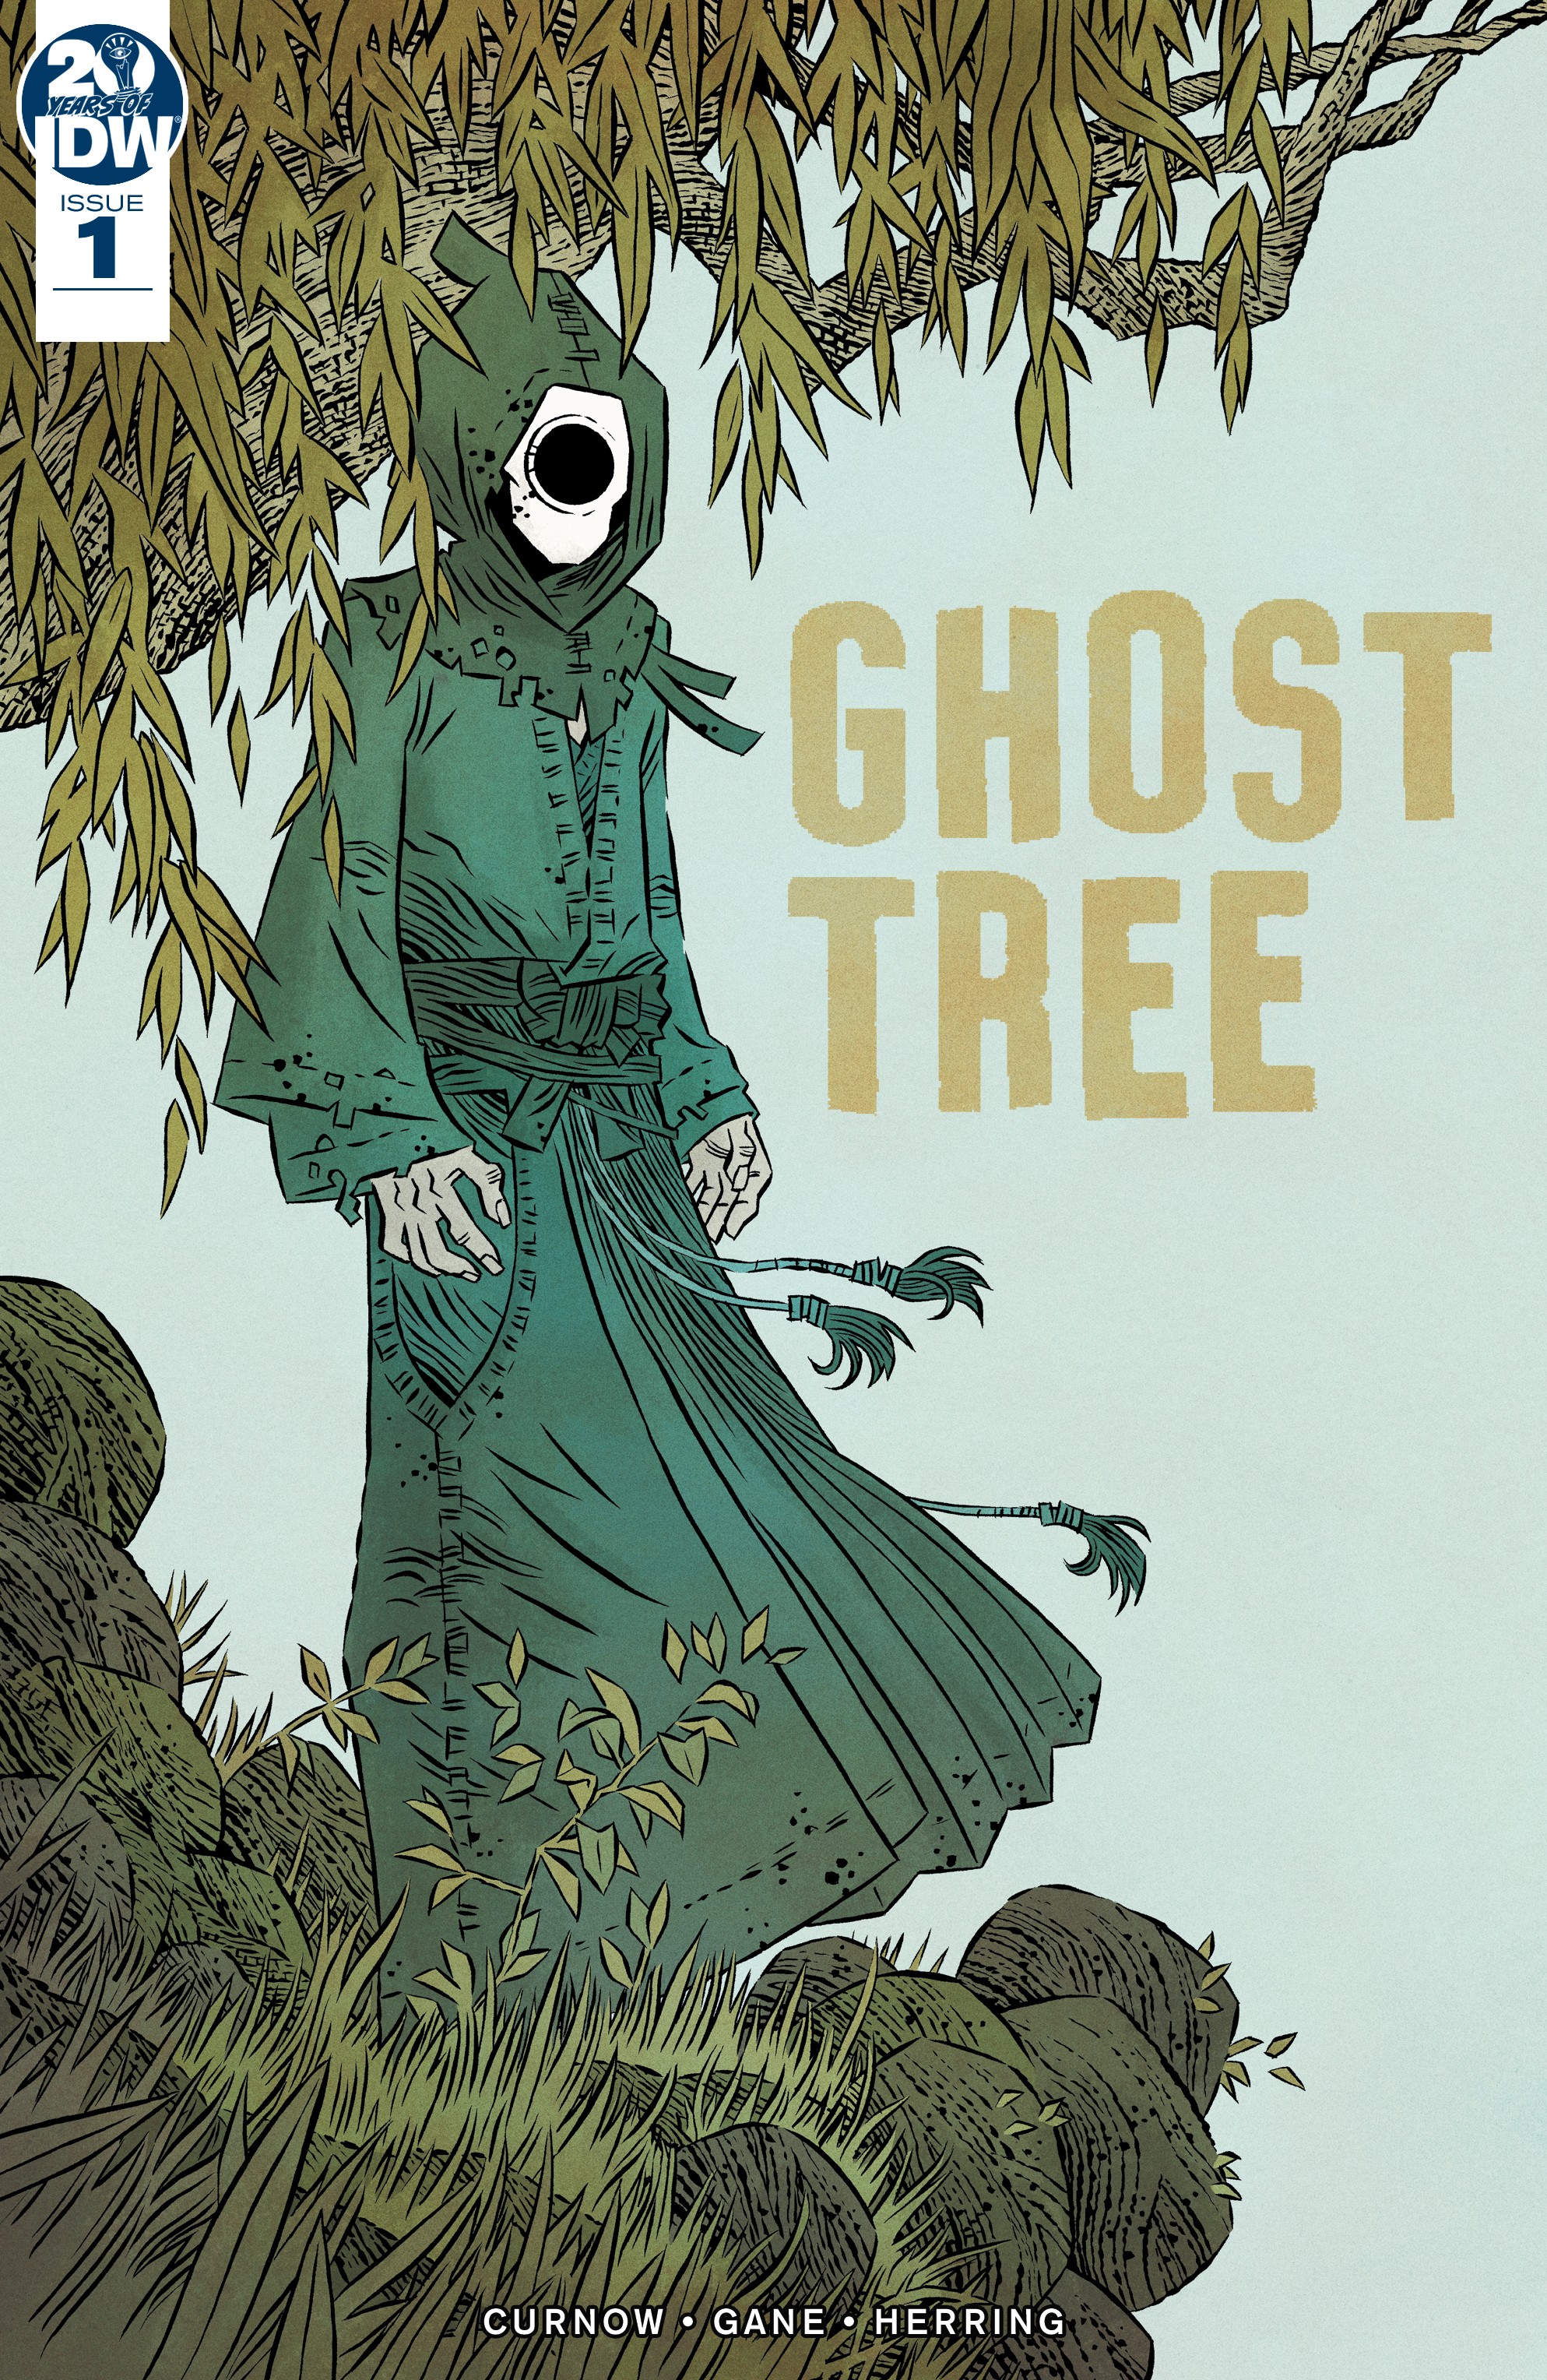 Read online Ghost Tree comic -  Issue #1 - 1